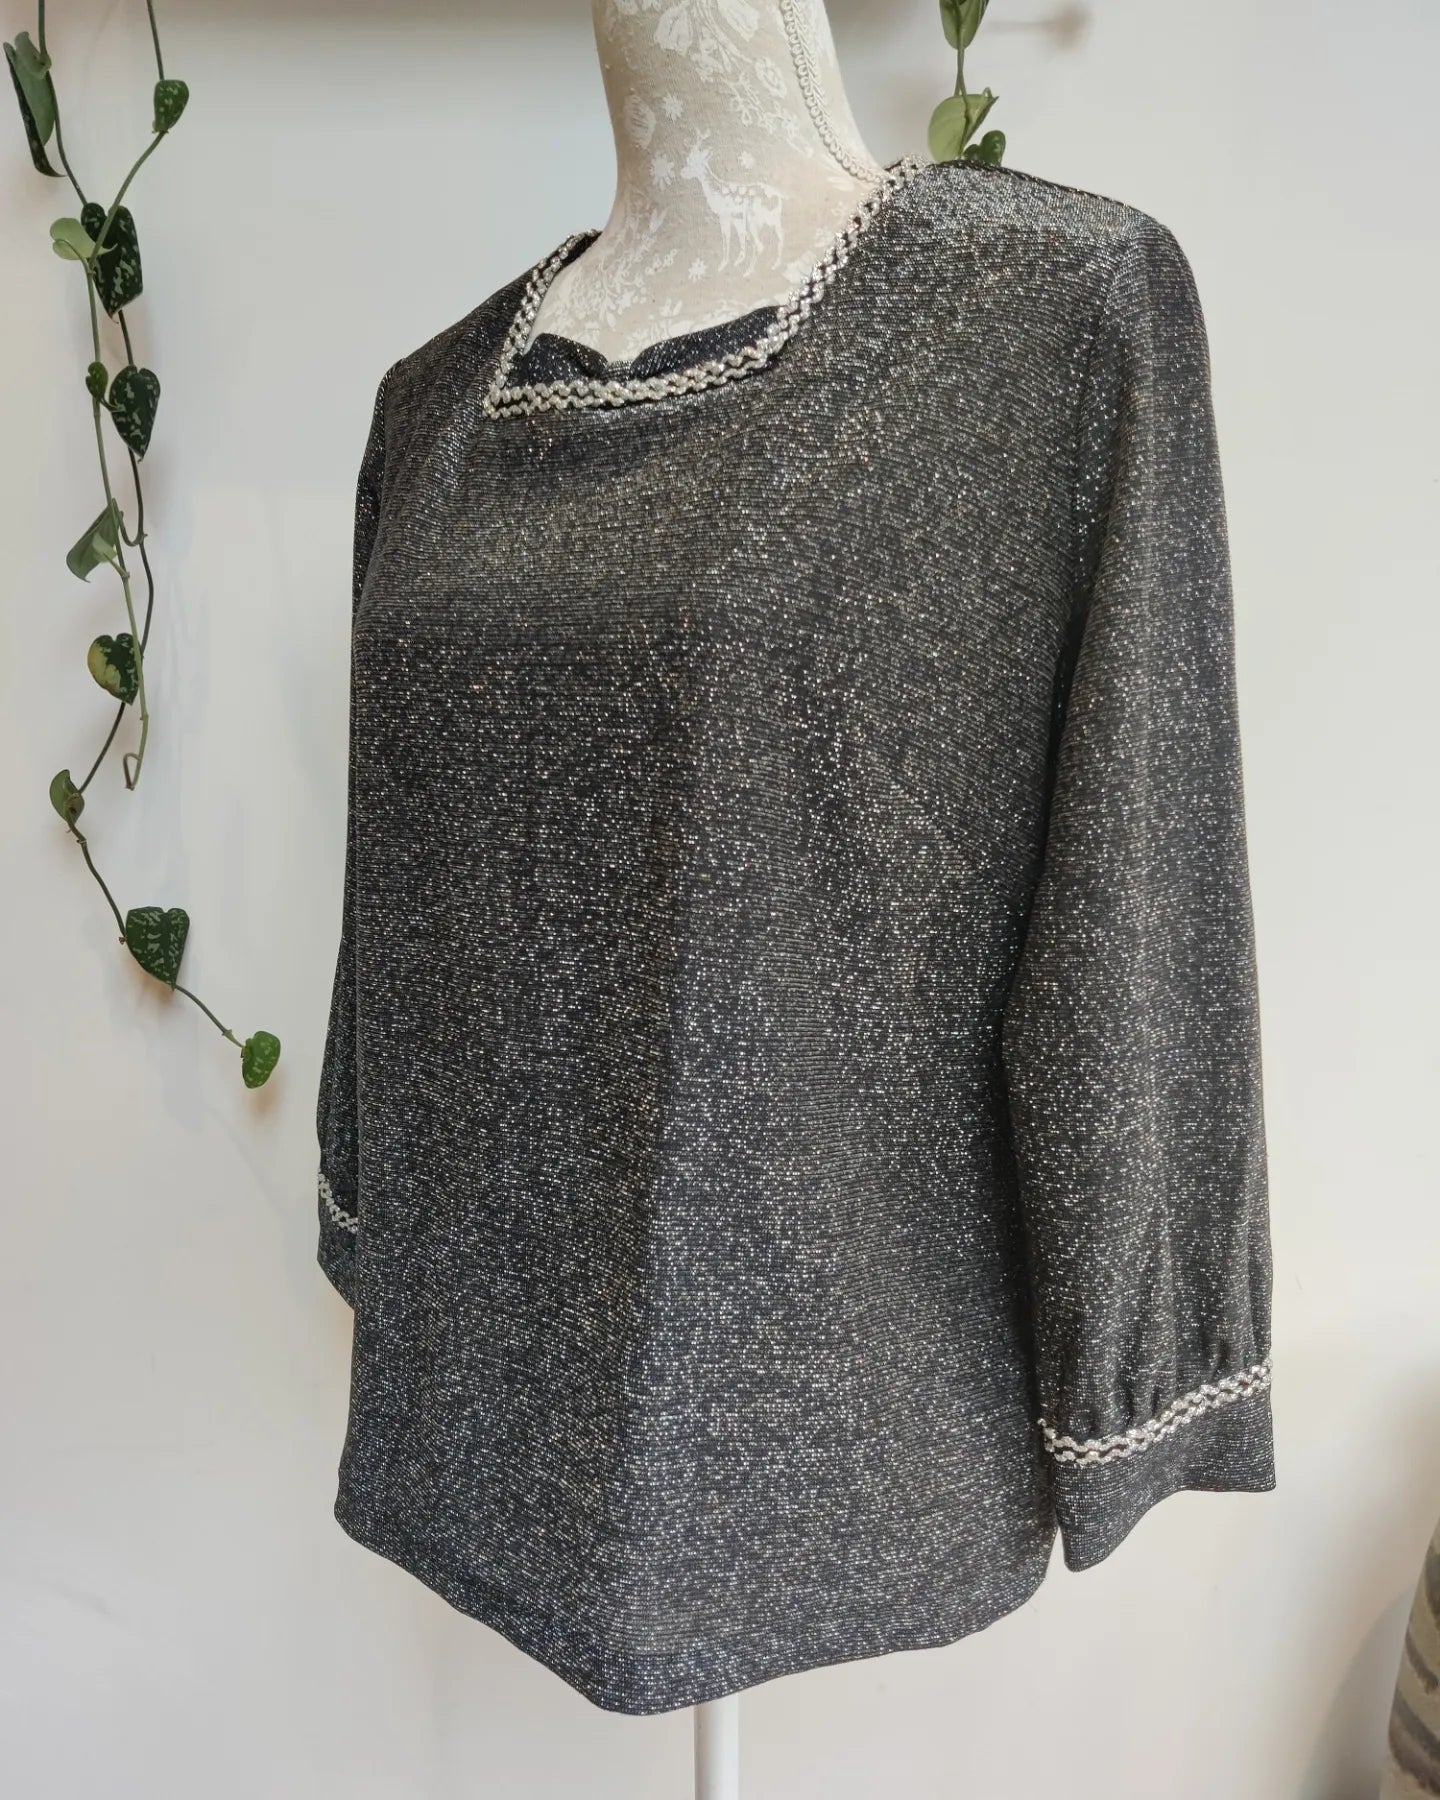 Vintage lurex top with three quarter length sleeves.